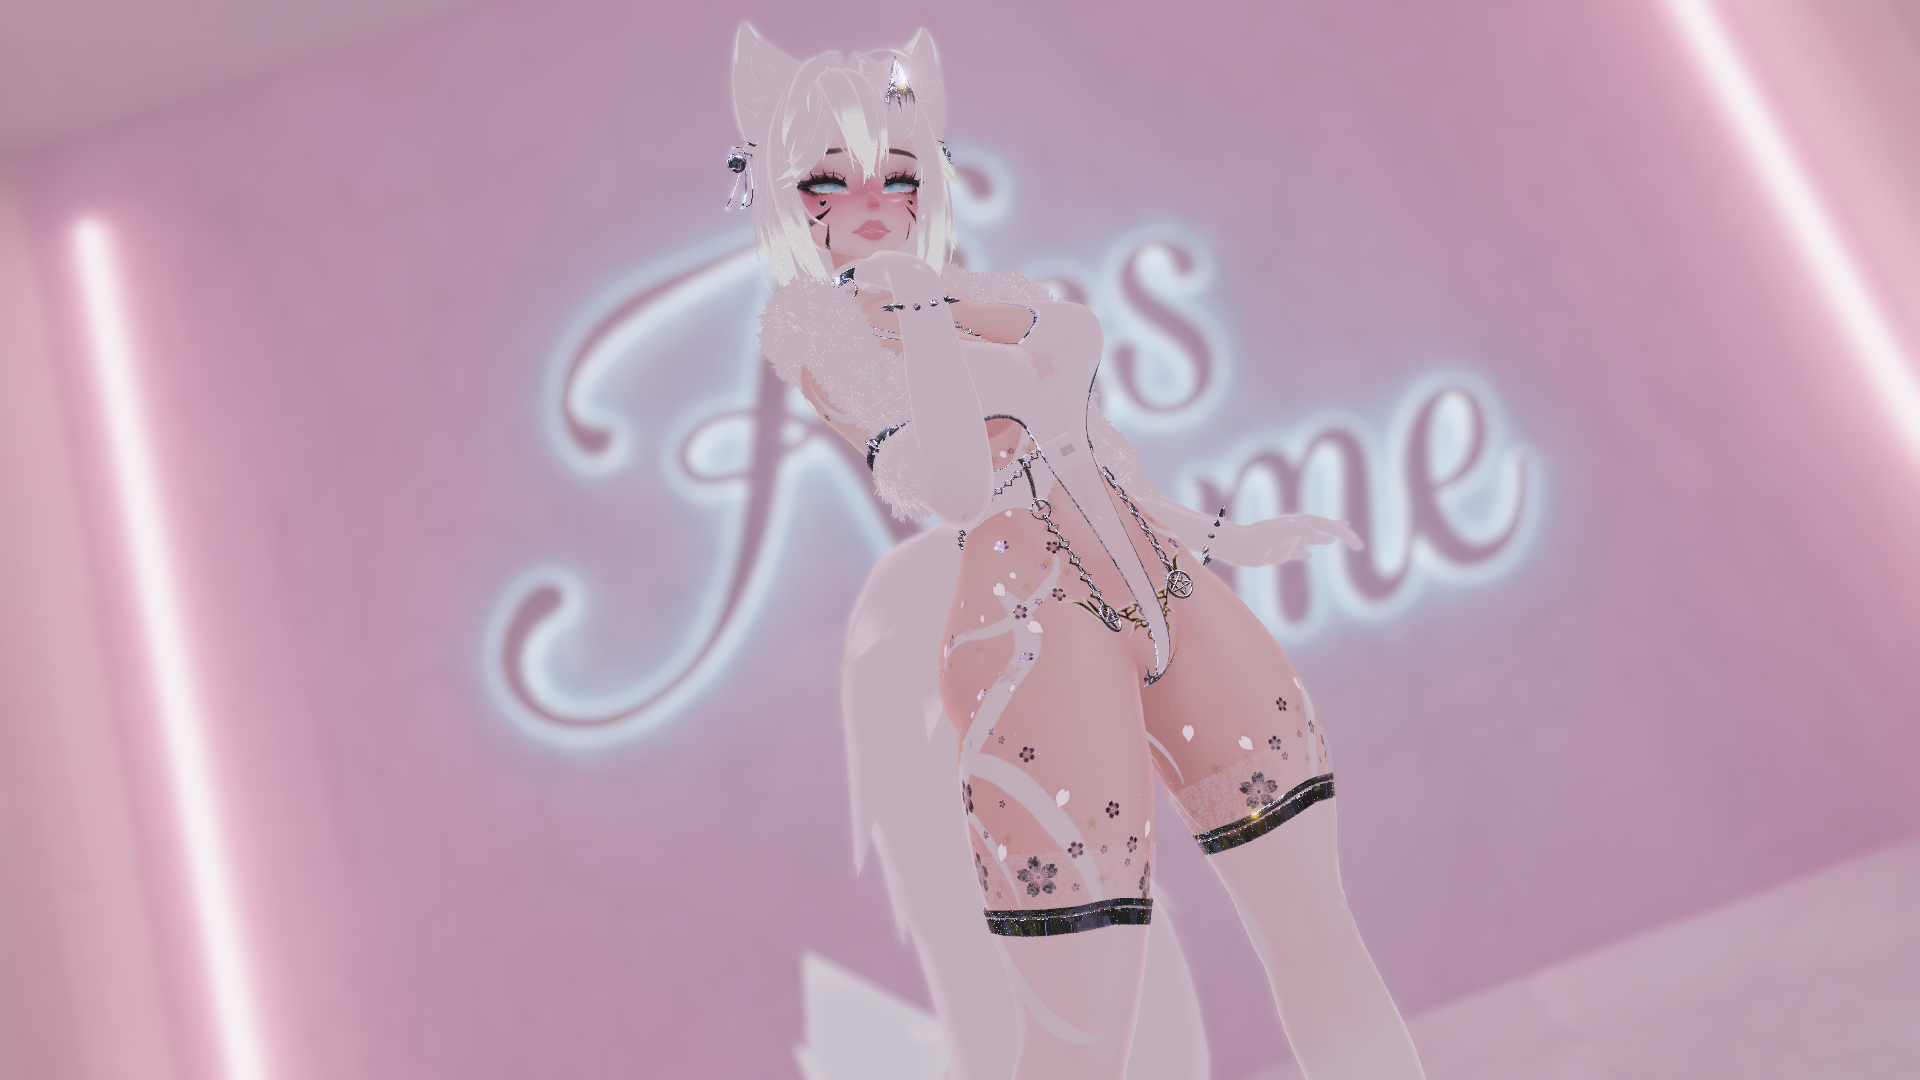 VRChat_2023-06-19_05-18-28.960_1920x1080.png